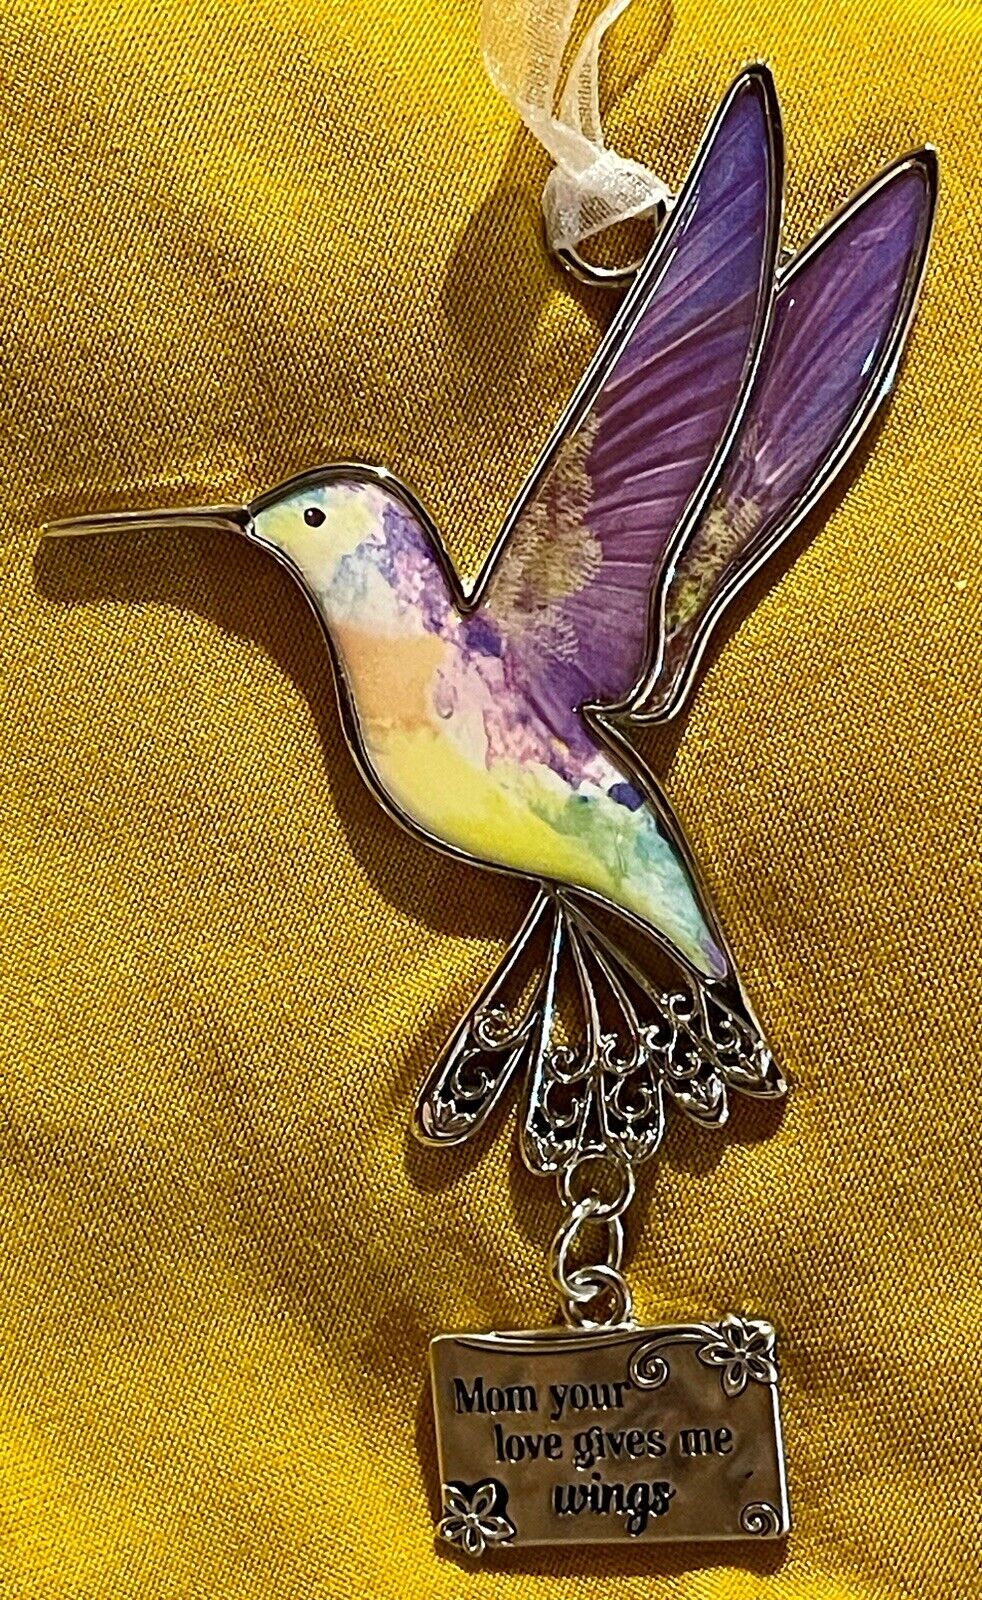 Hummingbird ornament “Mom Your Love Gives Me Wings” 4 Inch